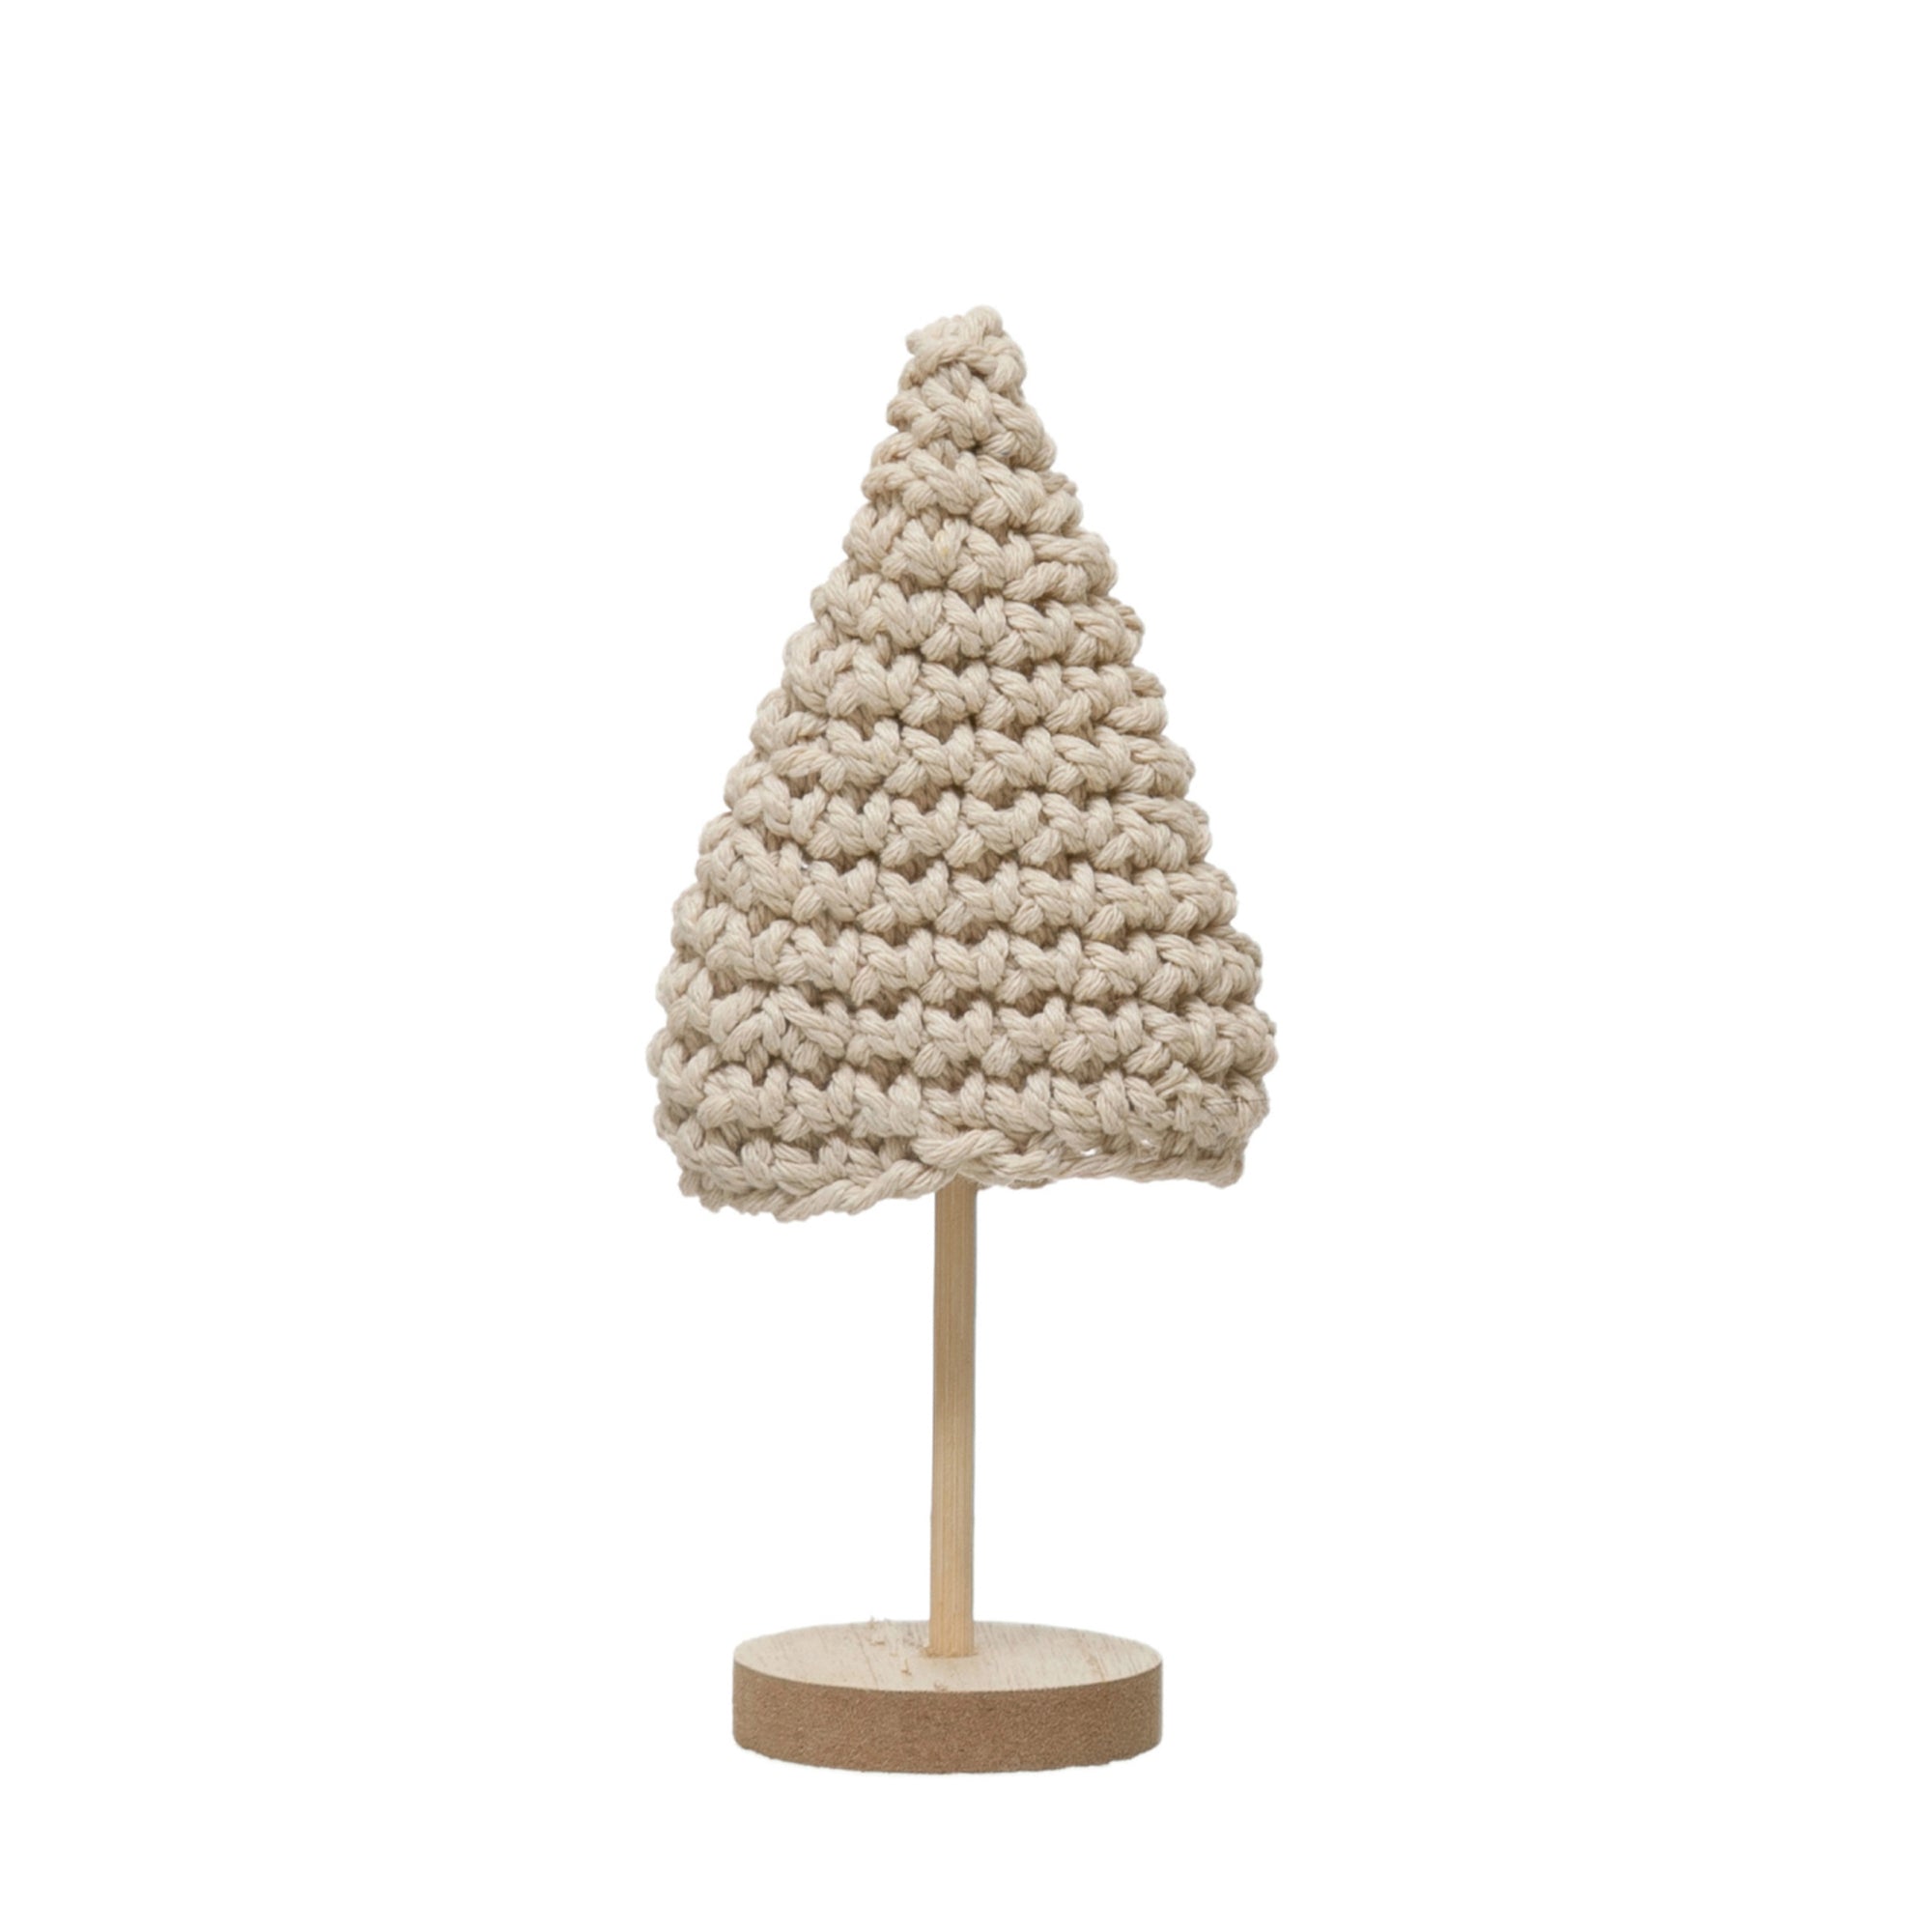 Cotton Crochet Trees with Wood Bases